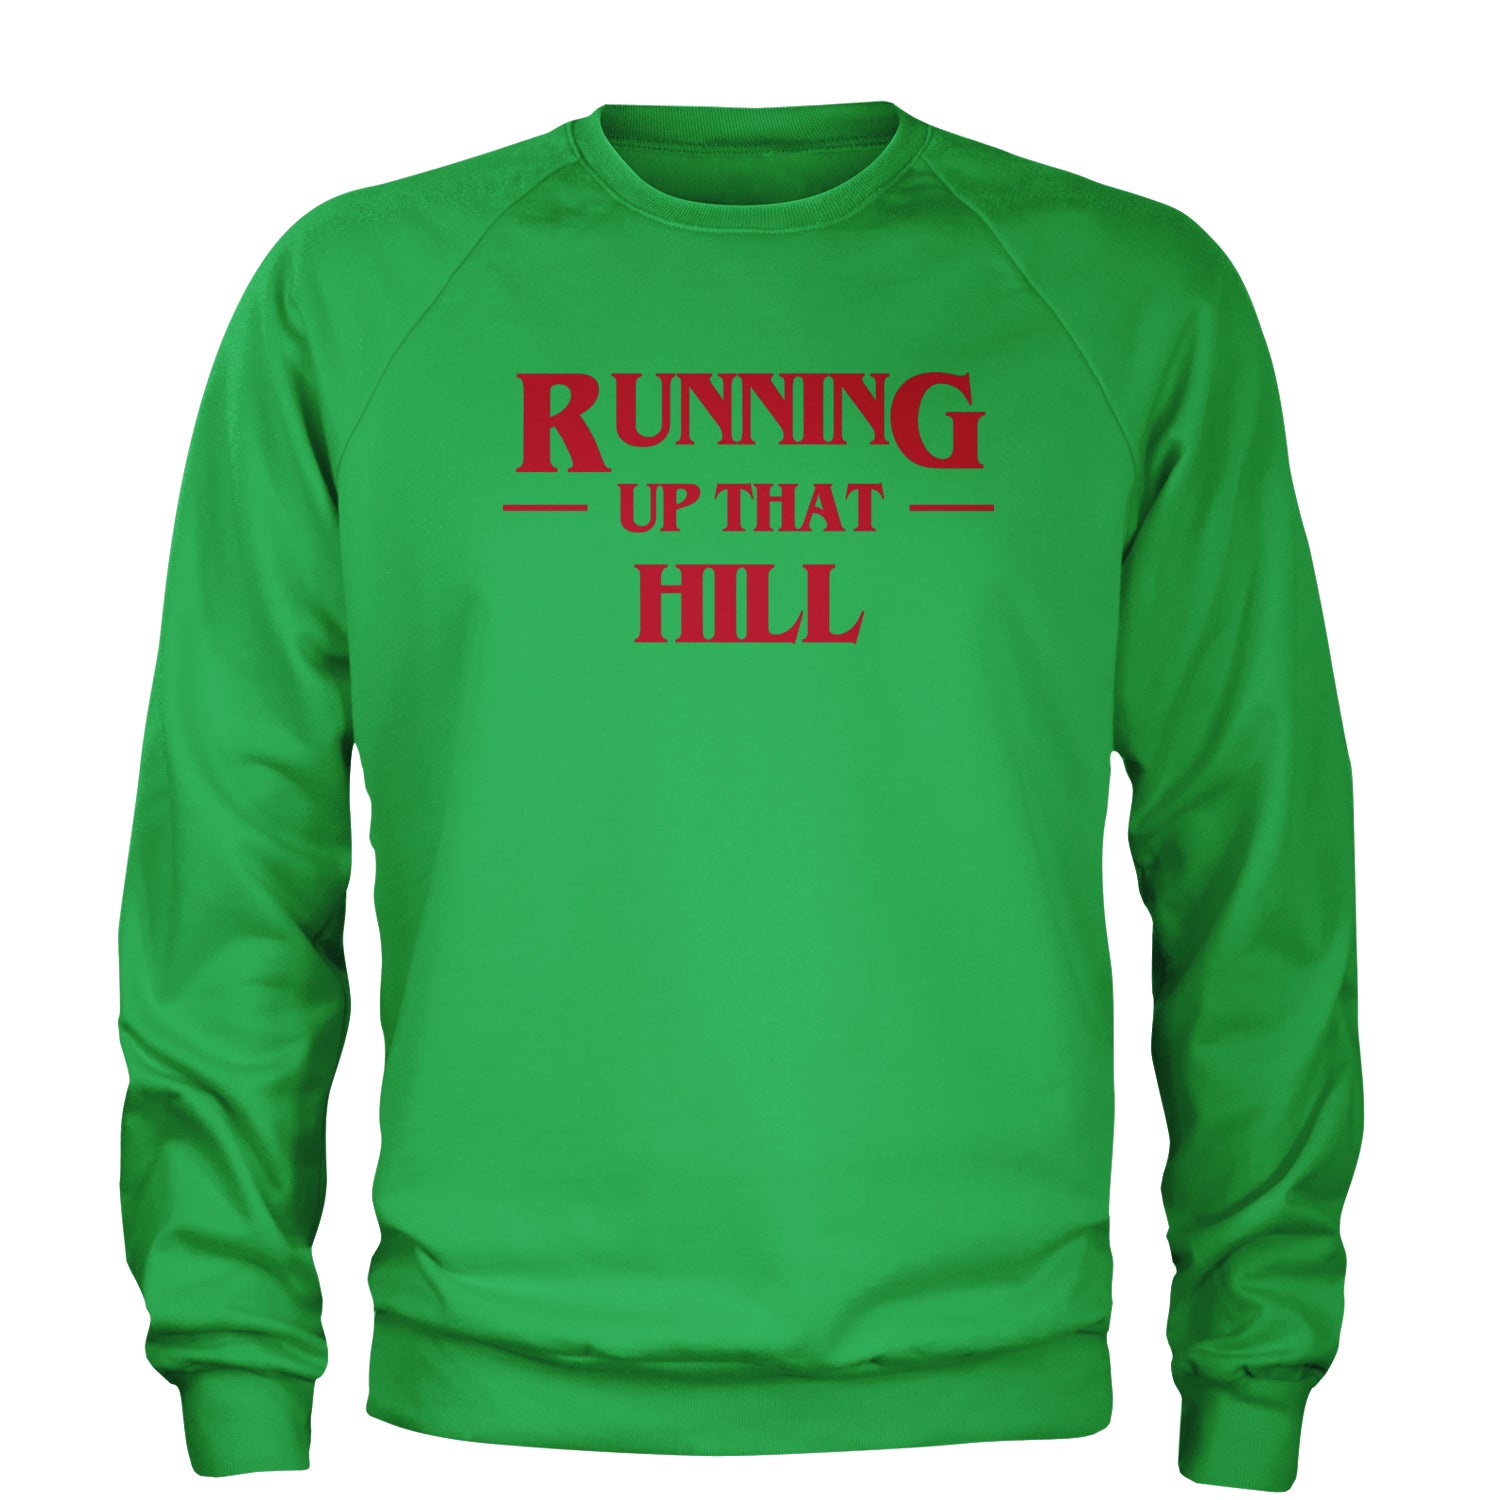 Running Up That Hill Adult Crewneck Sweatshirt 4, don’t, eleven, four, friends, lie, season by Expression Tees